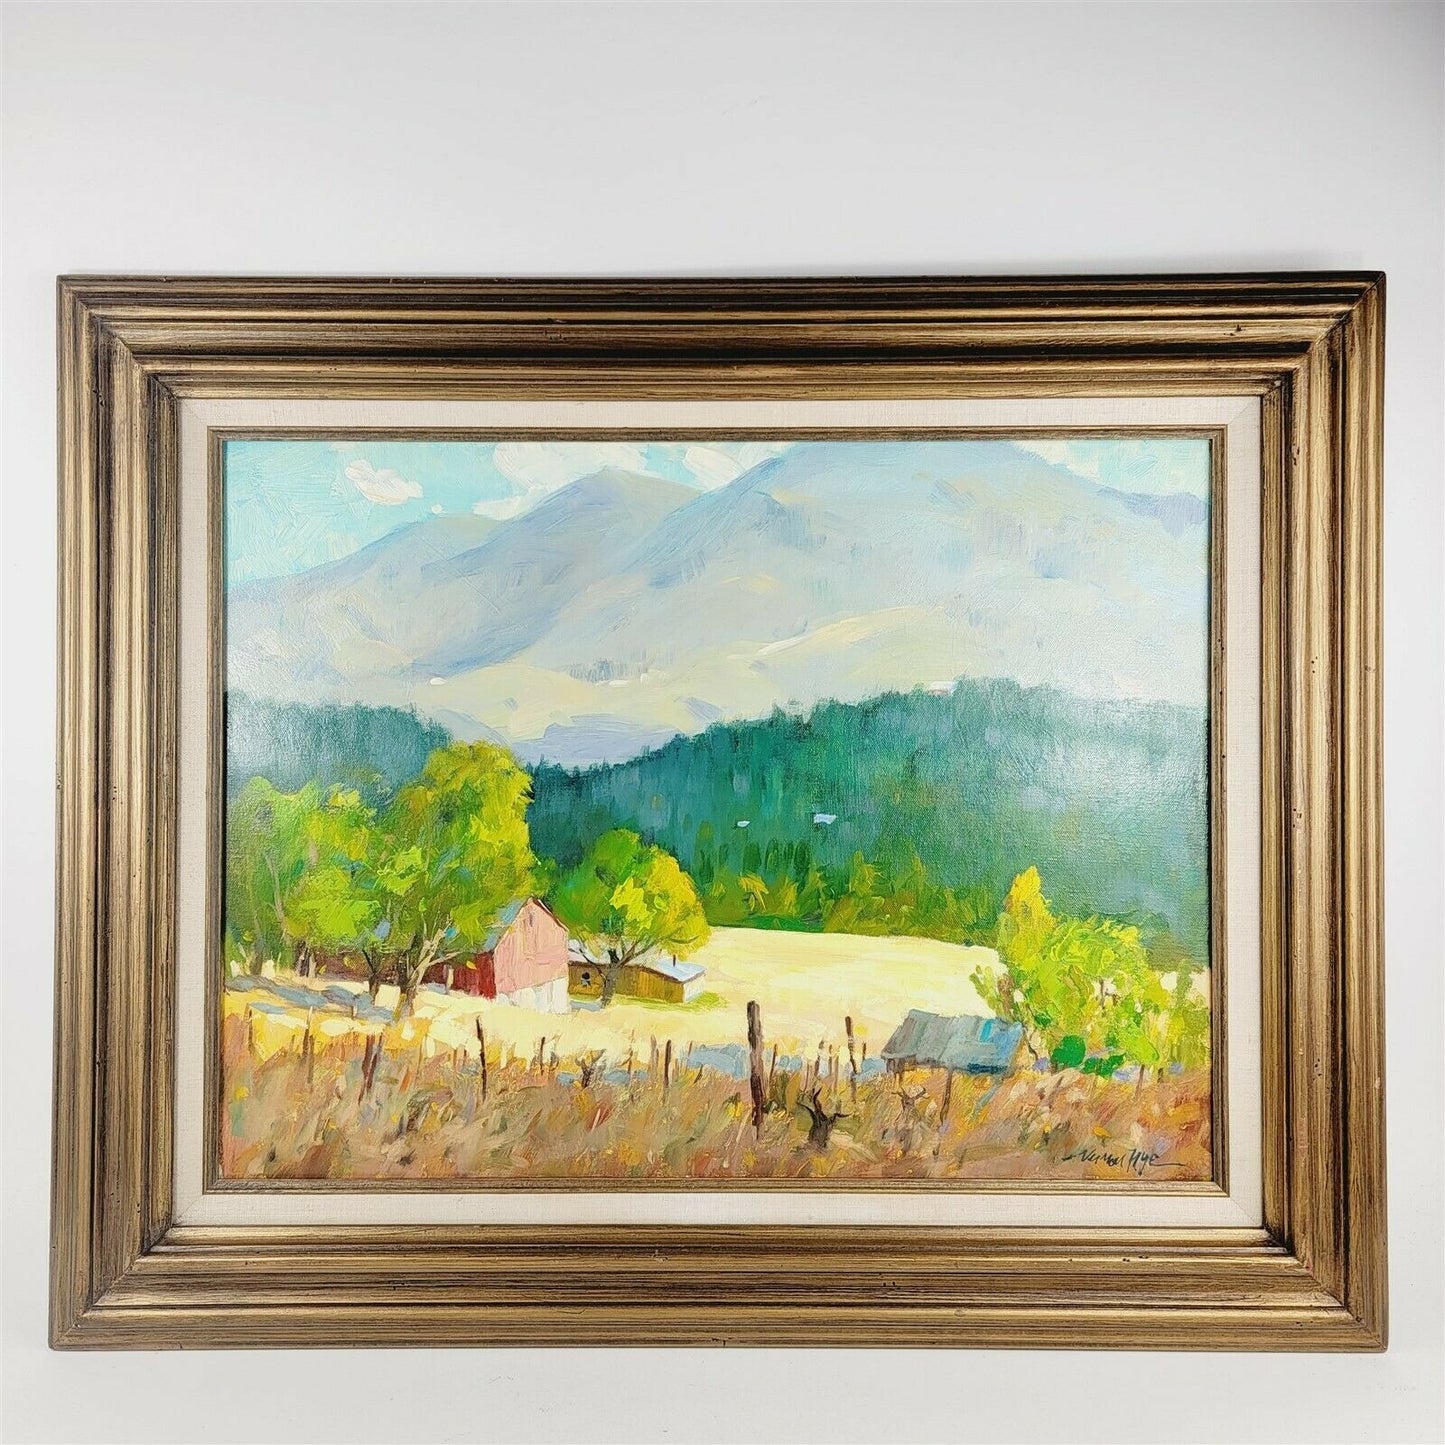 Vintage Landscape Oil Painting by Vernon Nye Red Barn Farm Field Forest Mountain